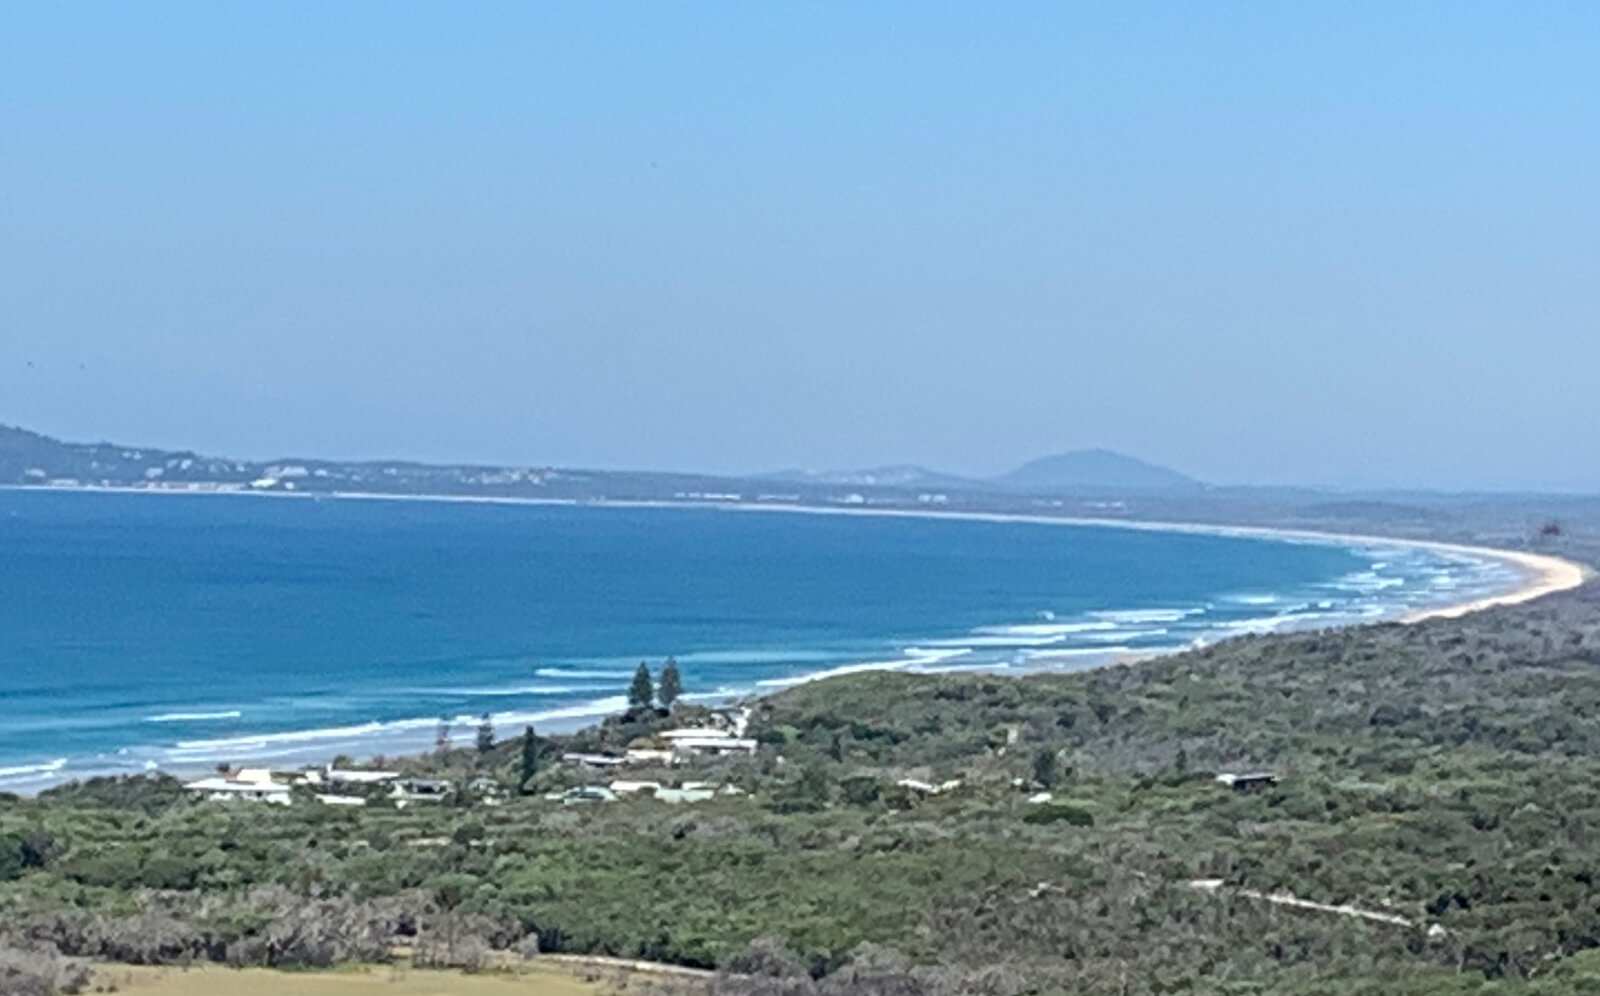 View from Mt Seawah south